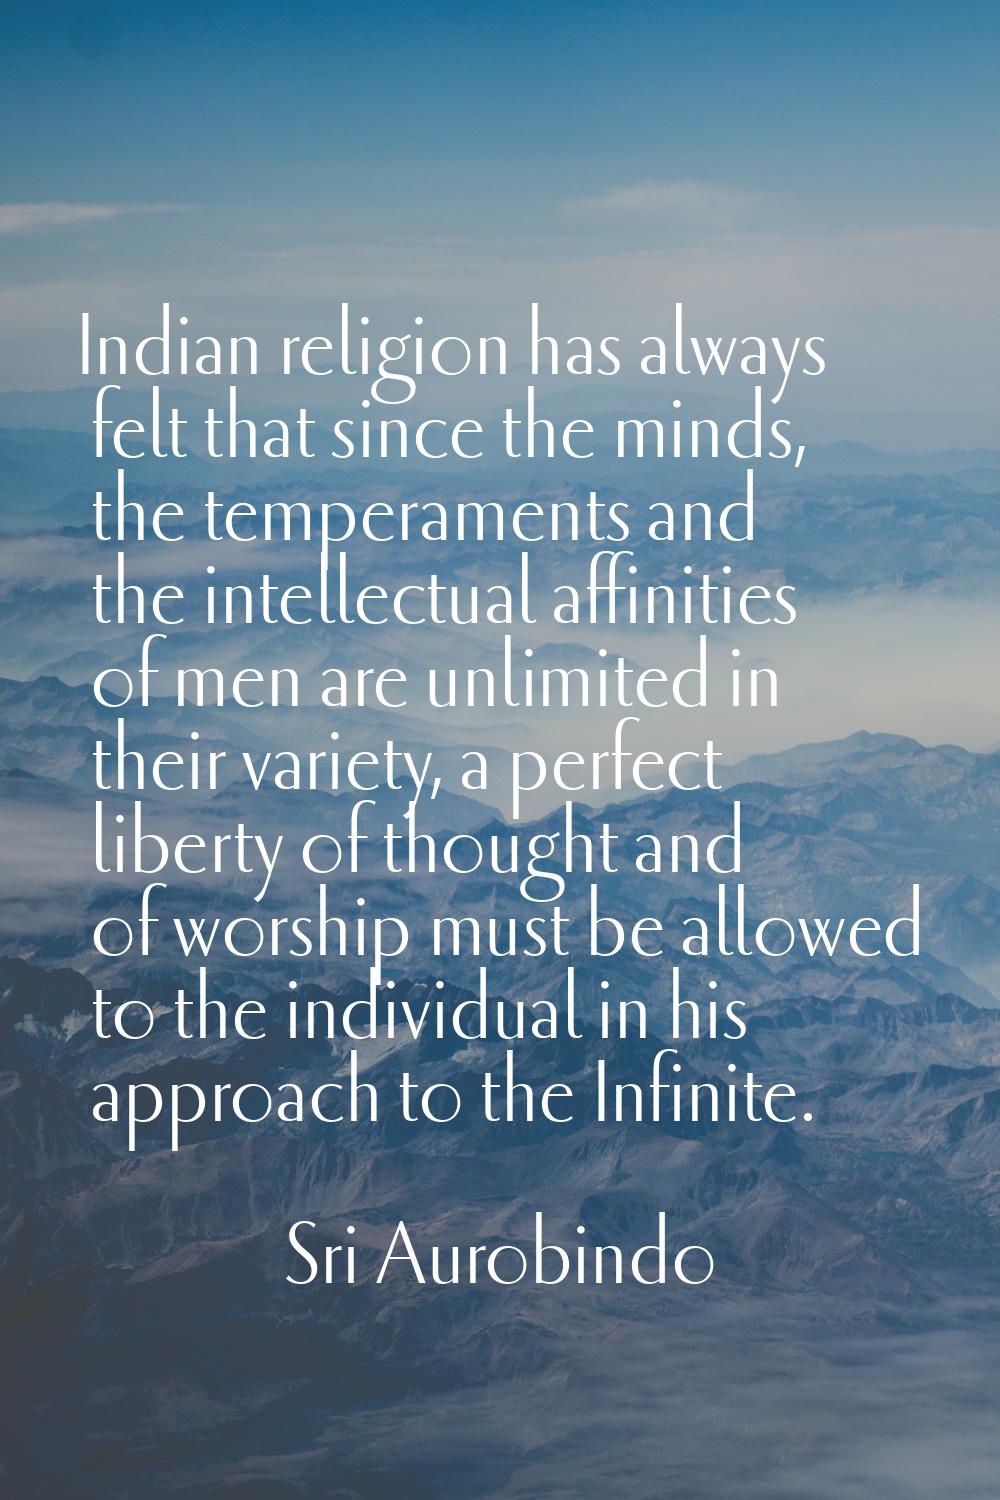 Indian religion has always felt that since the minds, the temperaments and the intellectual affinit